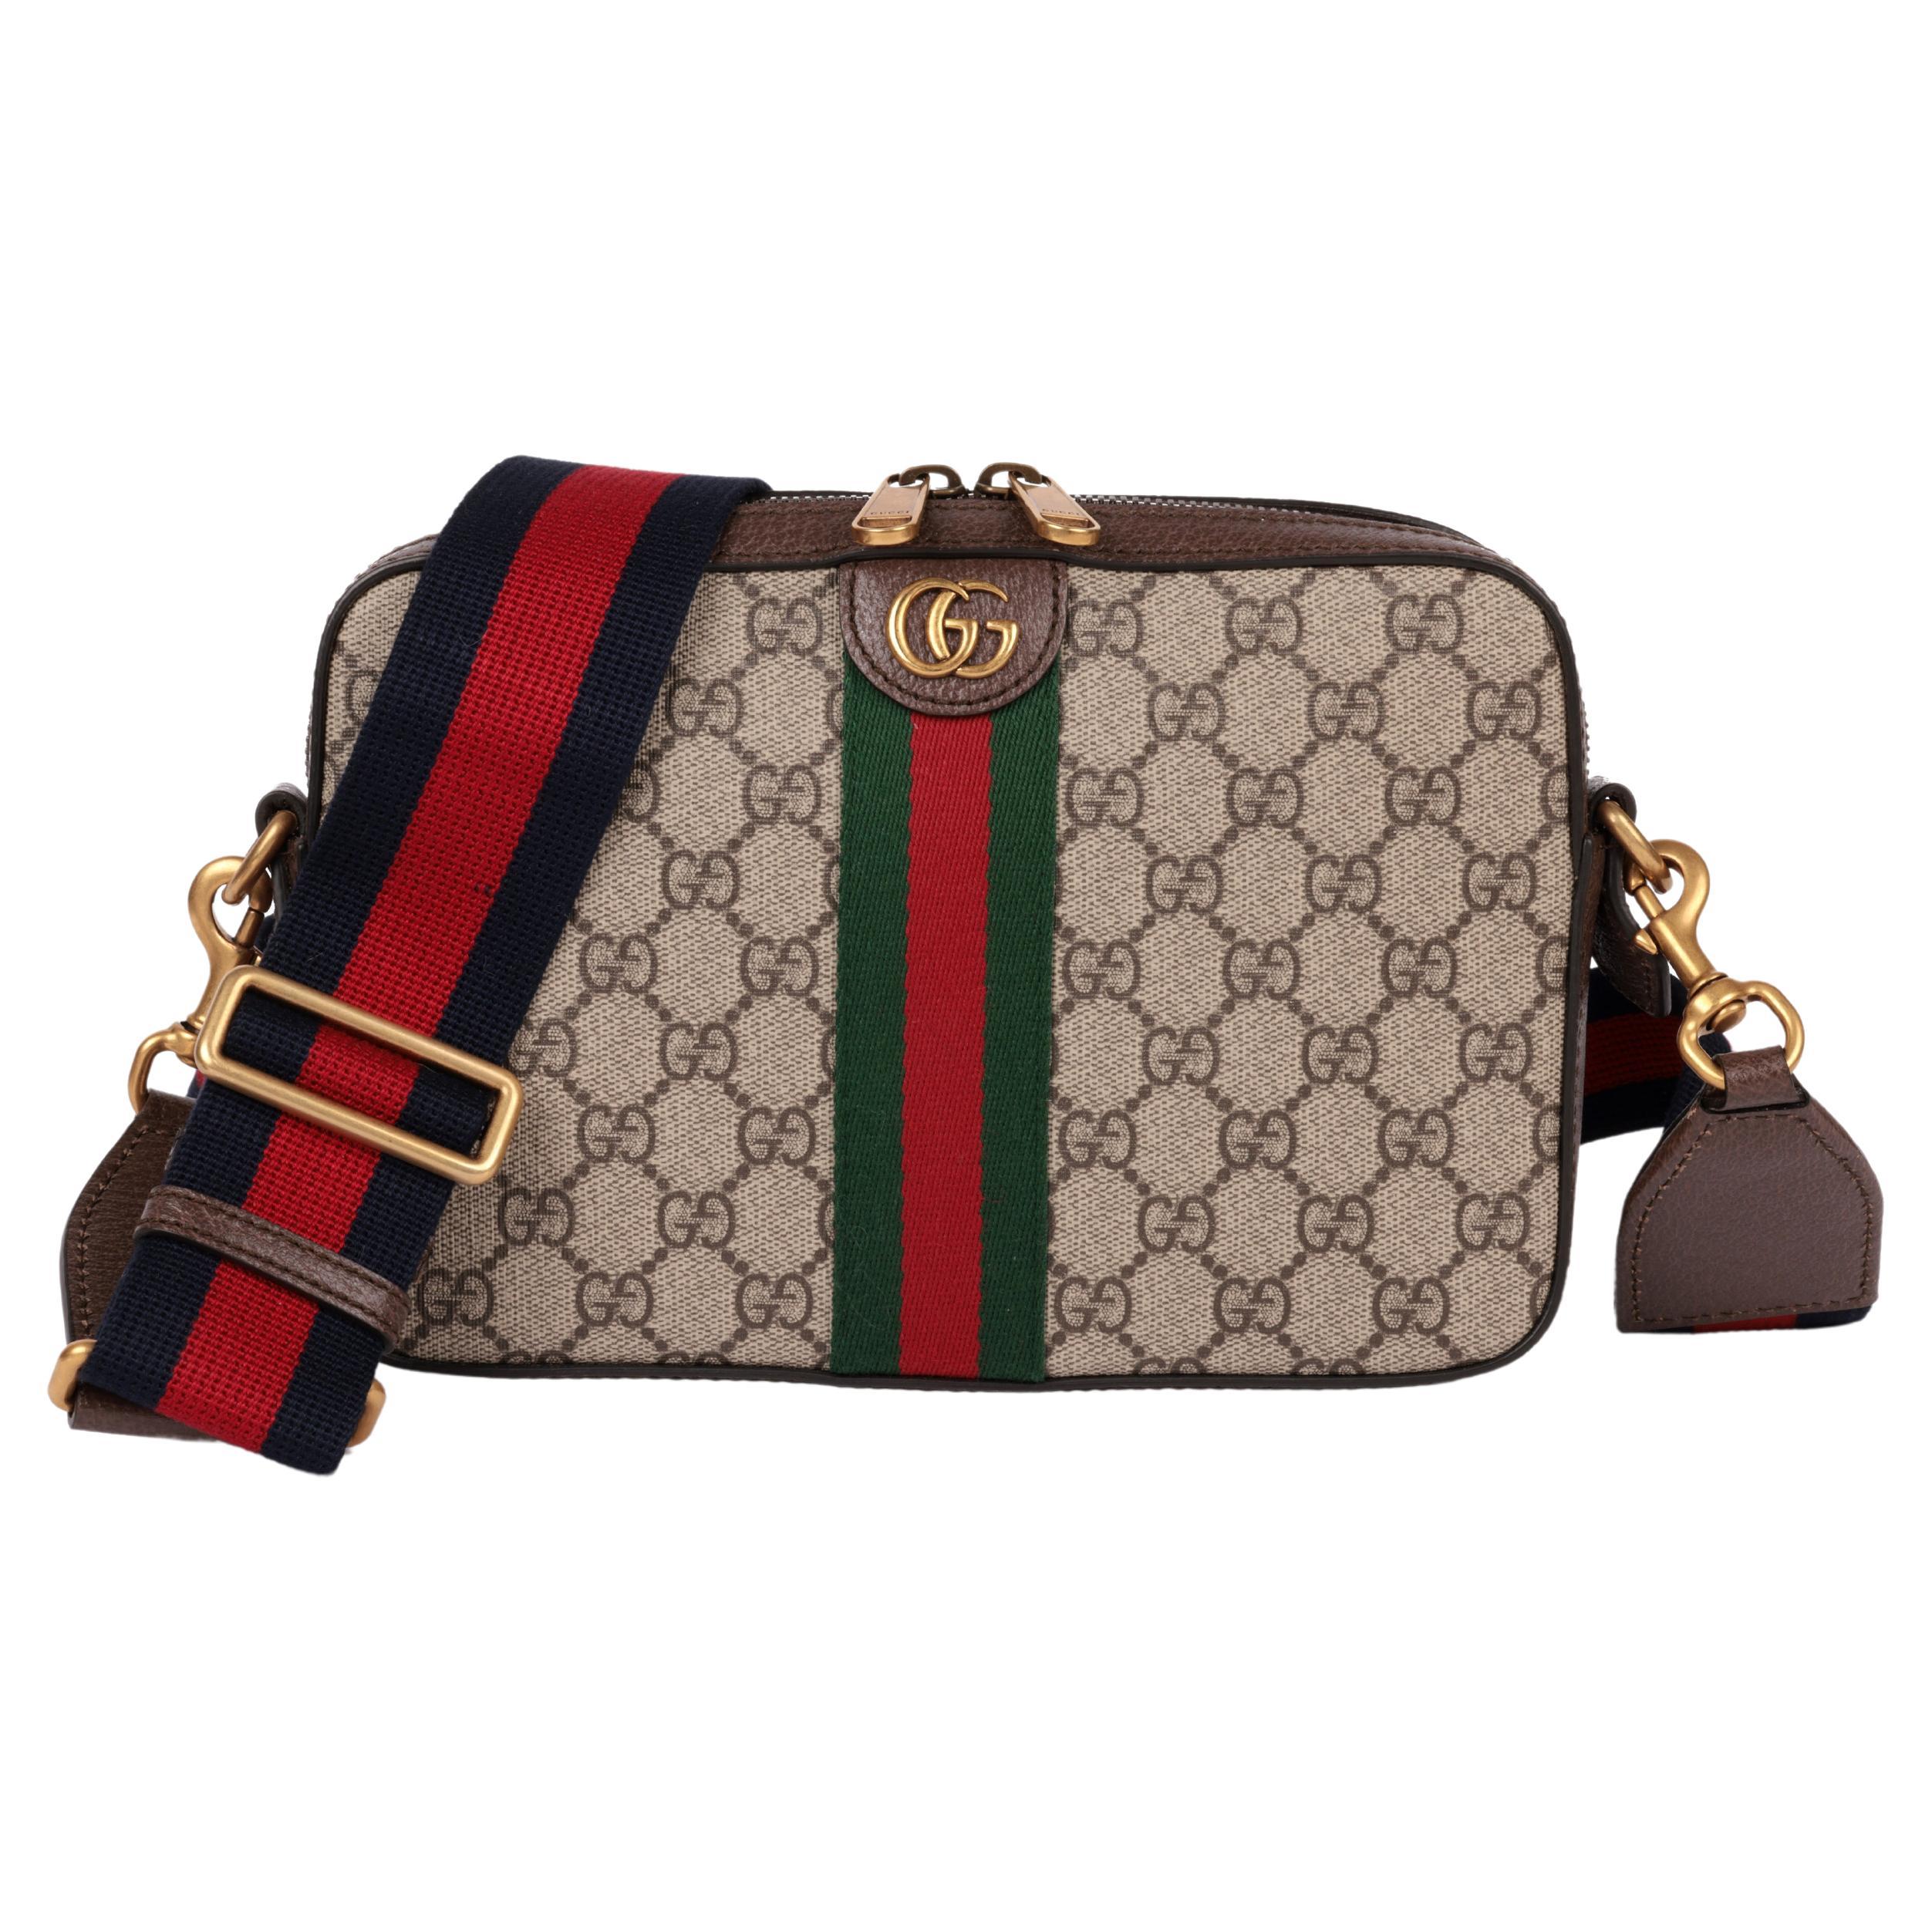 Gucci Beige GG Supreme Canvas, Brown Leather, Green & Red Web Ophodia GG Shoulde